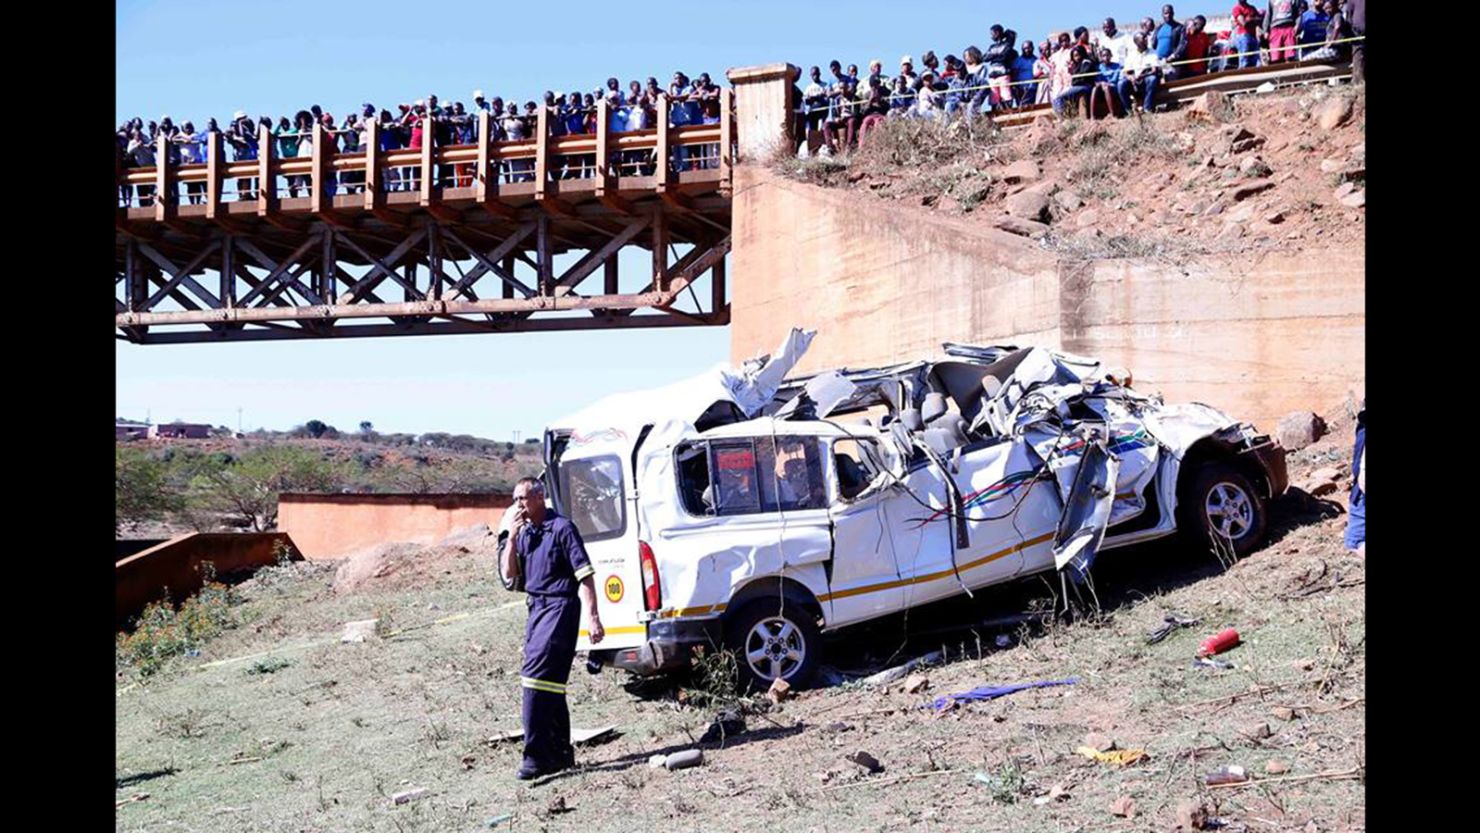 Residents watch from a bridge as authorities investigate a deadly minibus crash near Pietermaritzburg, South Africa.